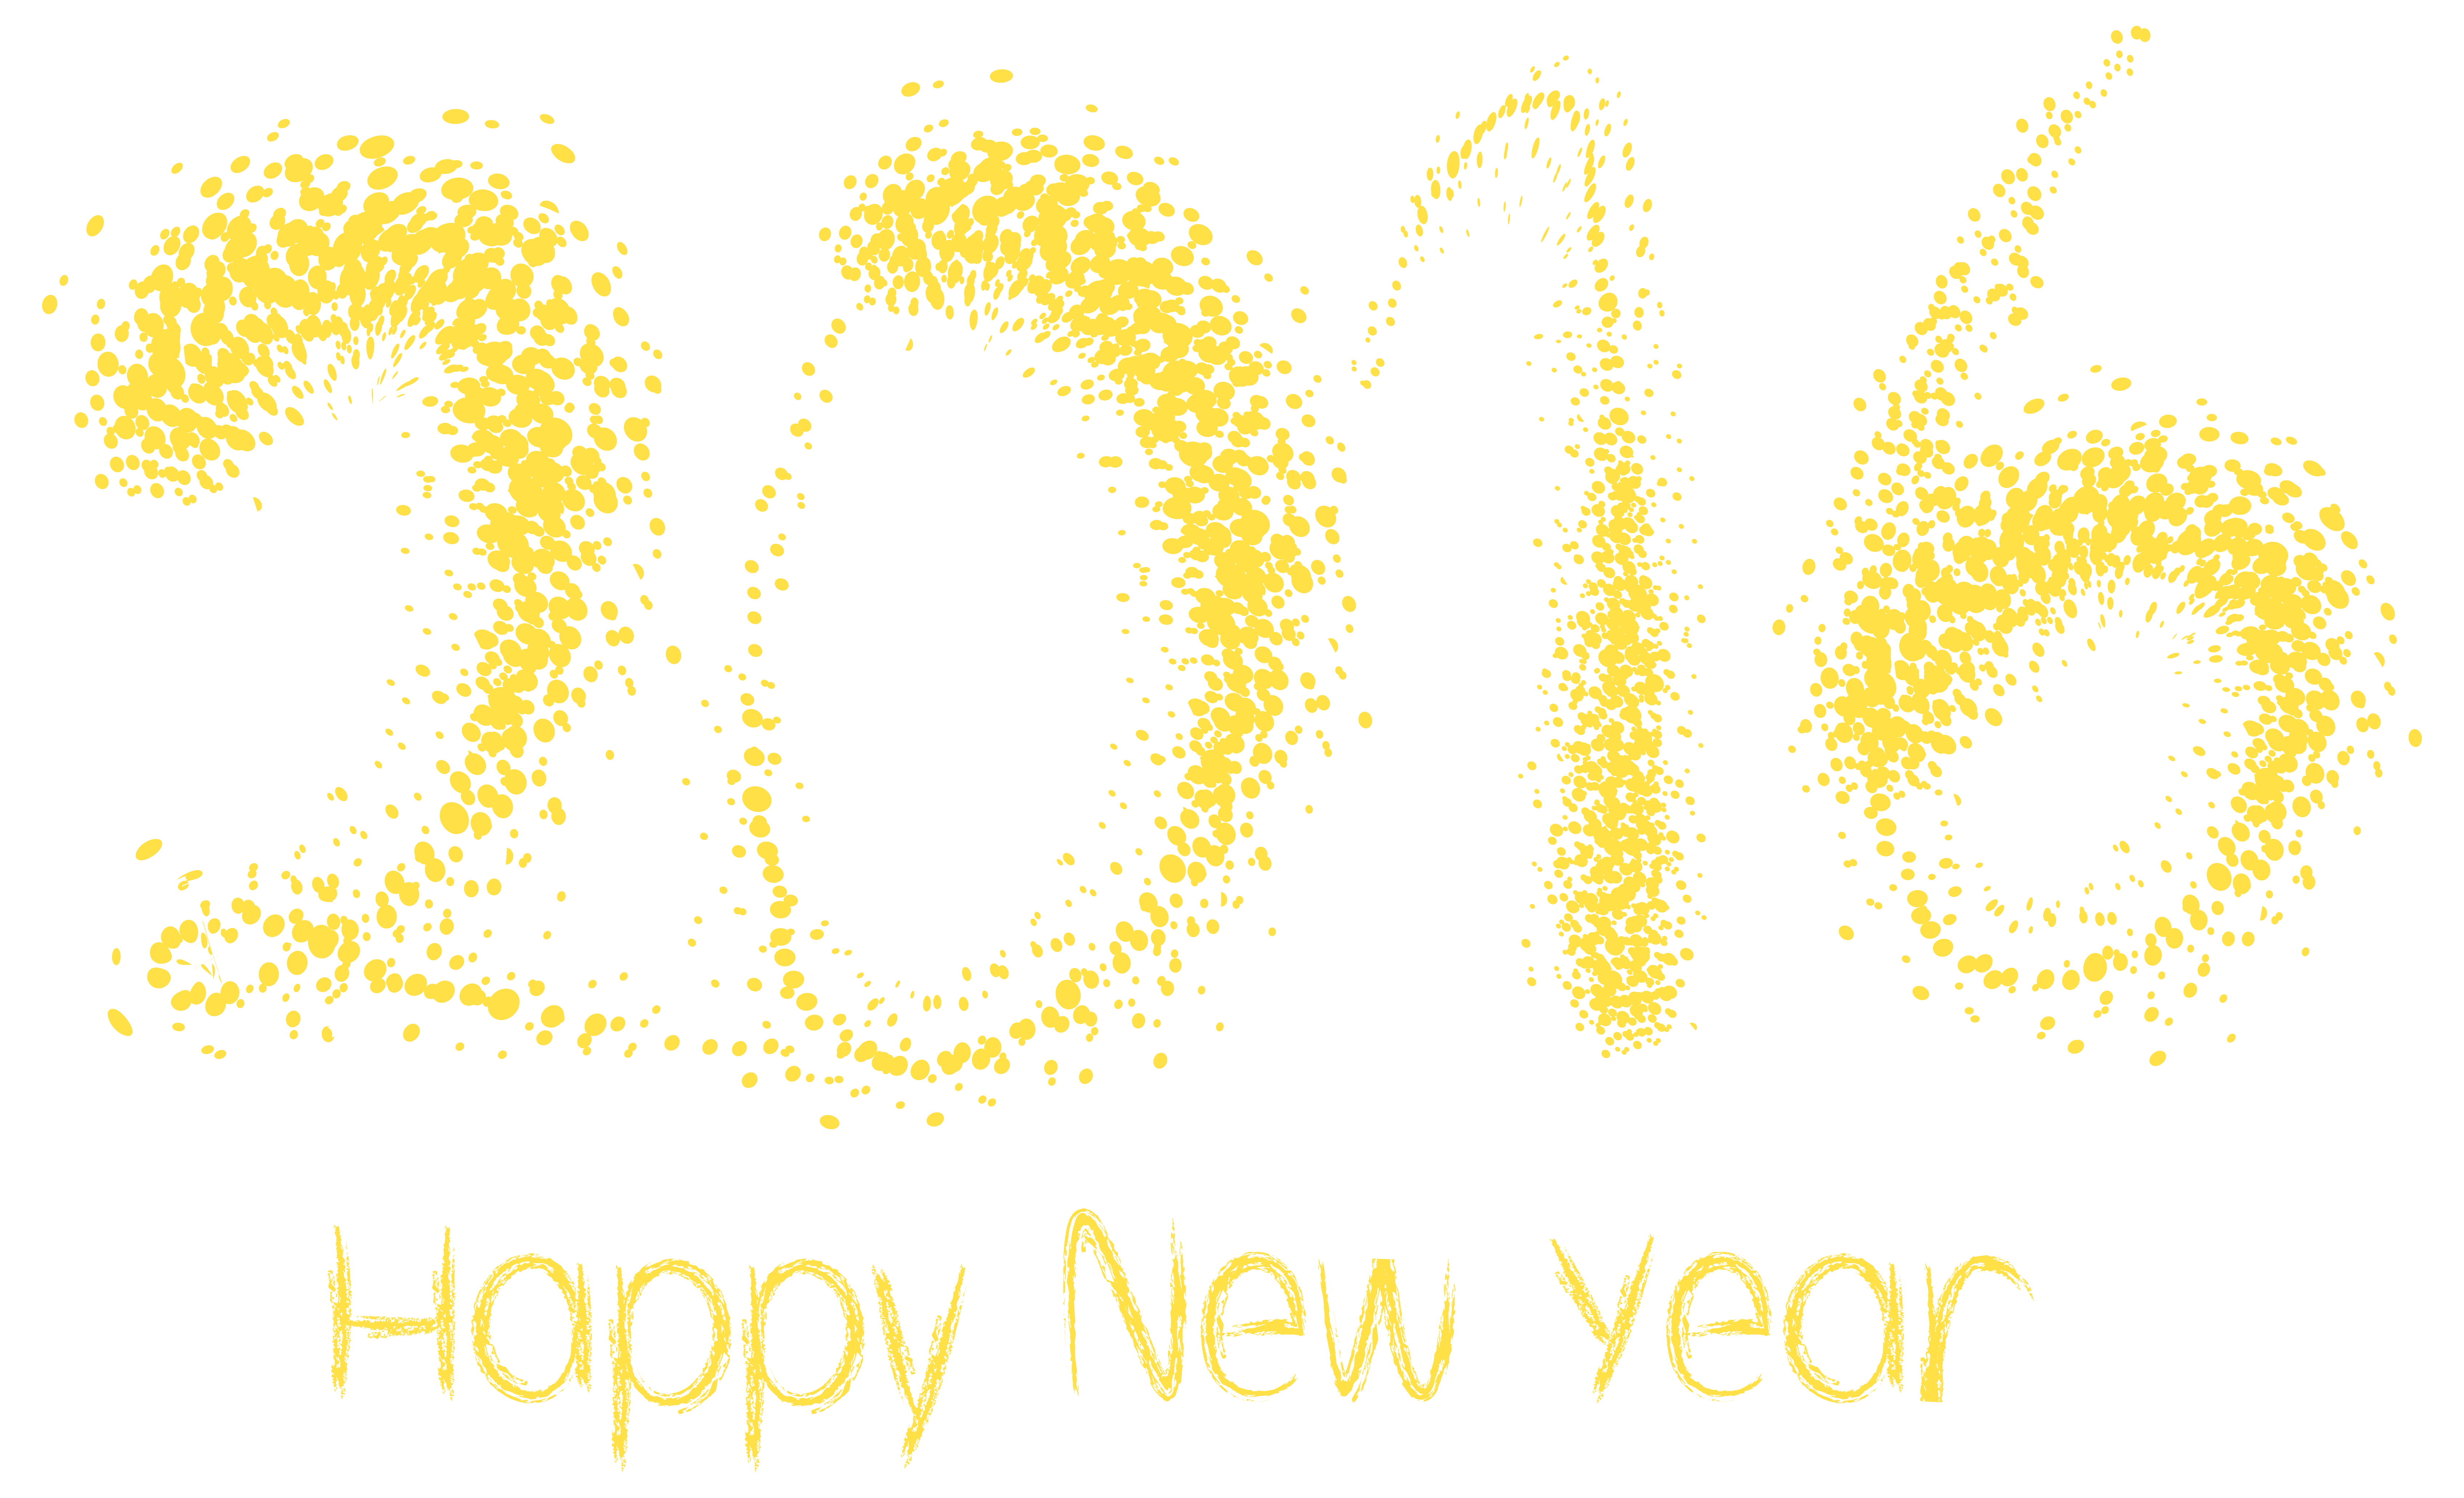 Graphic Pattern Yellow Design Year 2016 Happy Clipart